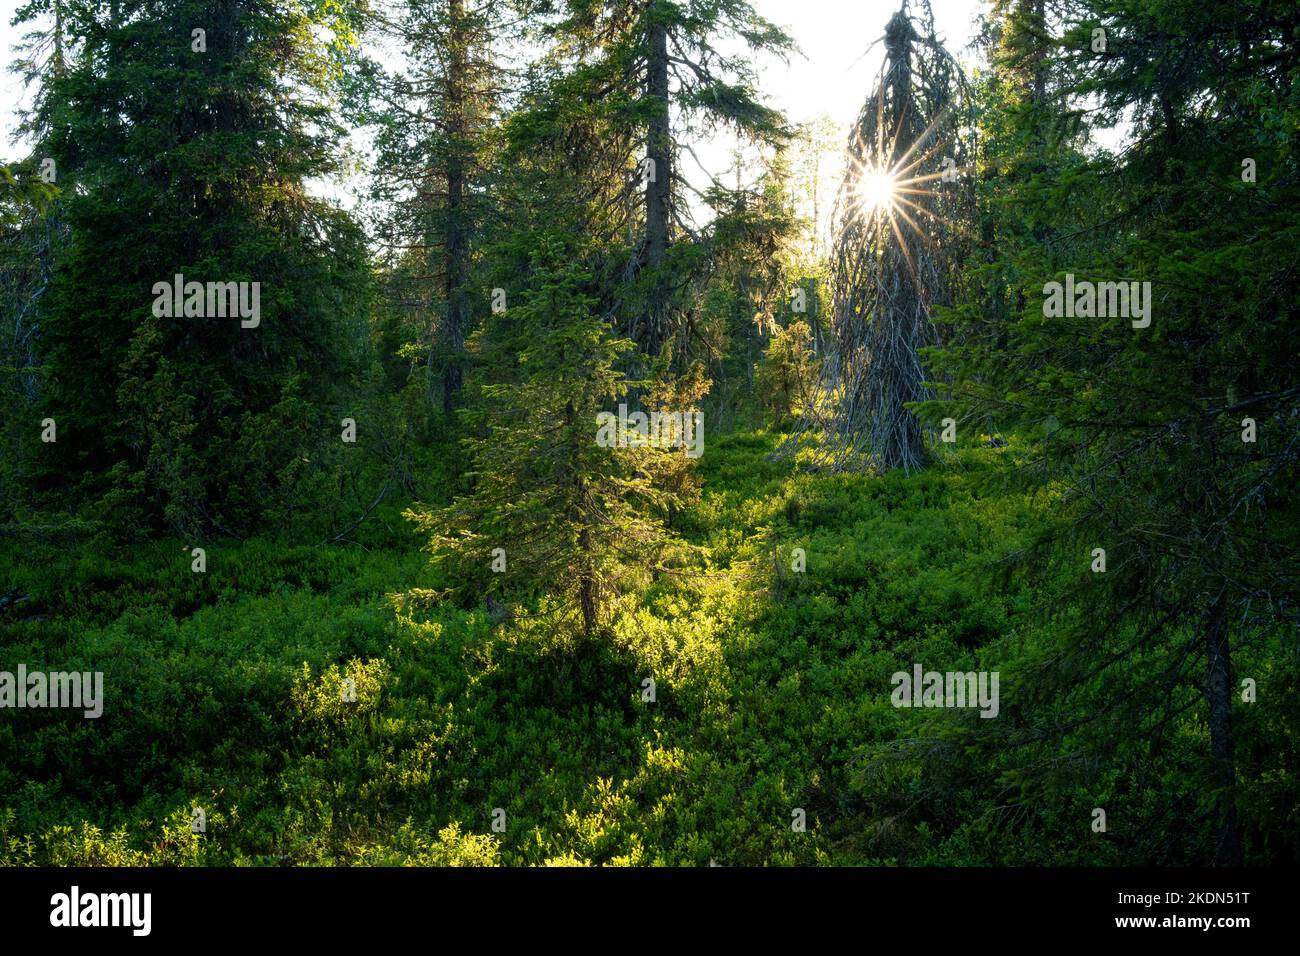 Summery old-growth taiga forest in Riisitunturi National Park, Northern Finland Stock Photo